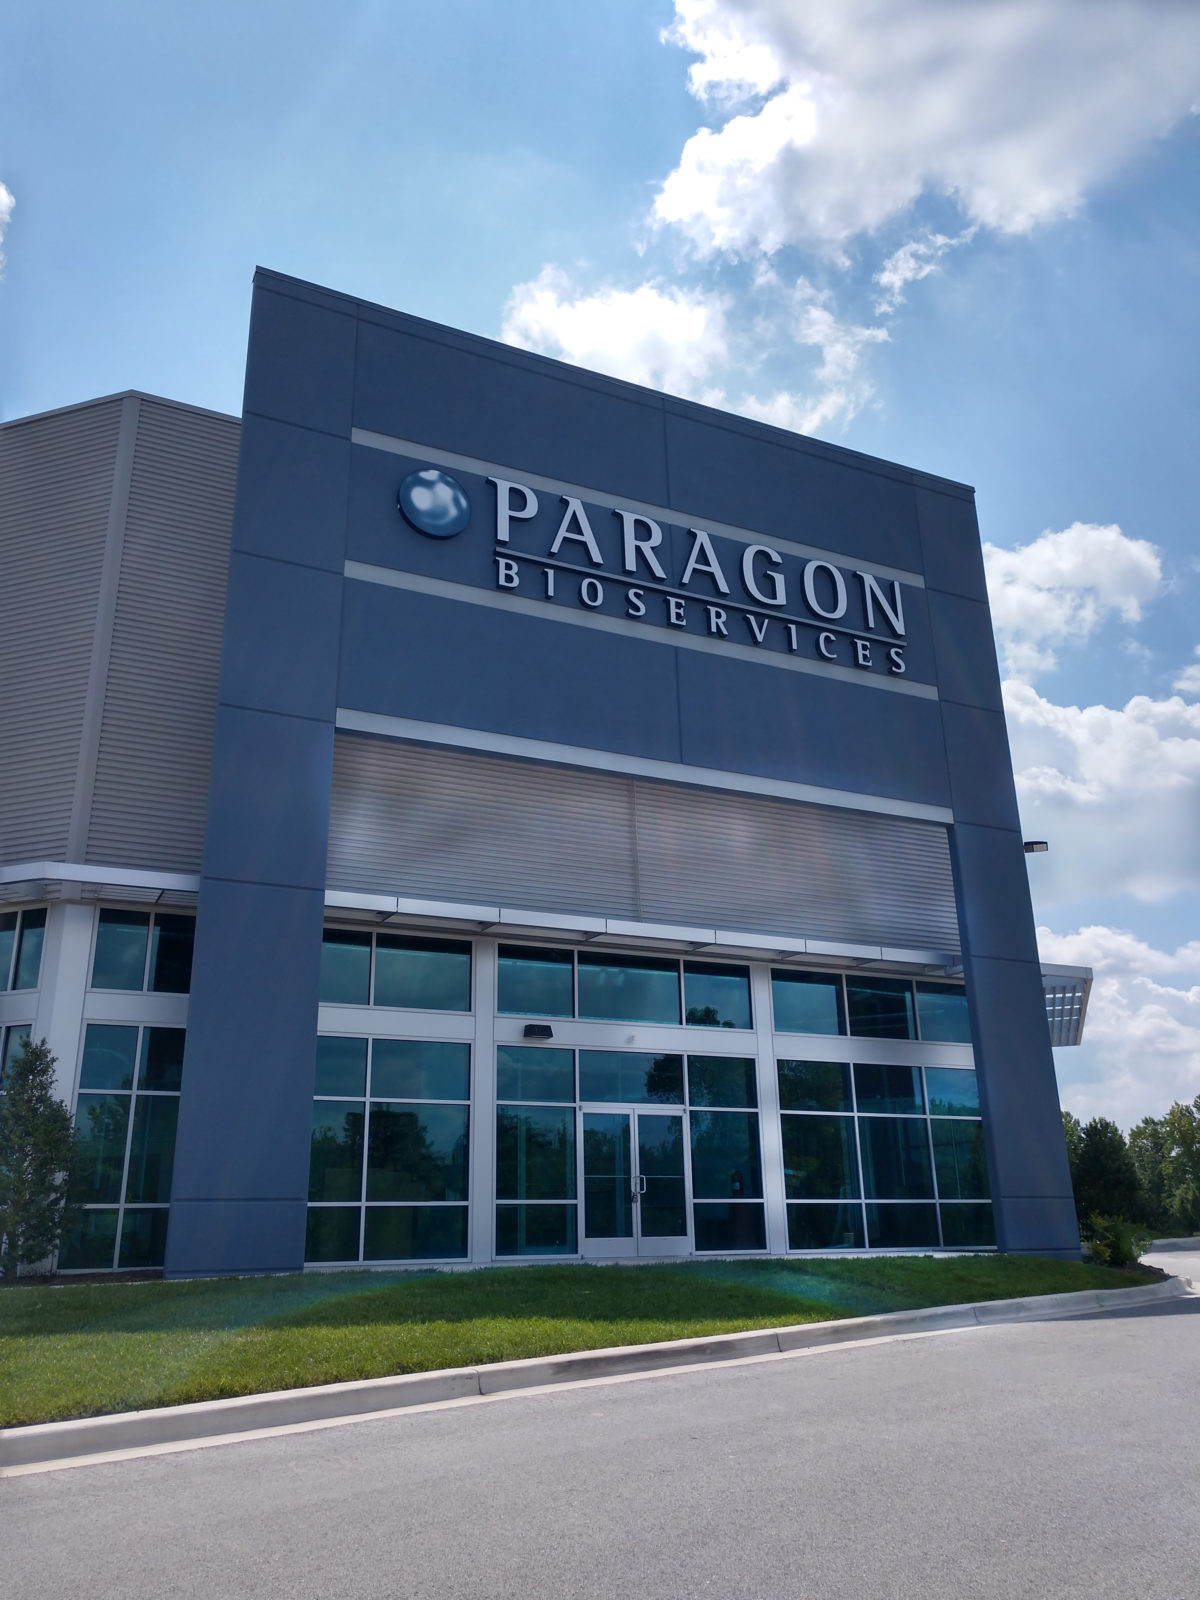 Paragon Bioservices in Anne Arundel County. (Photo by Chris Cooper)